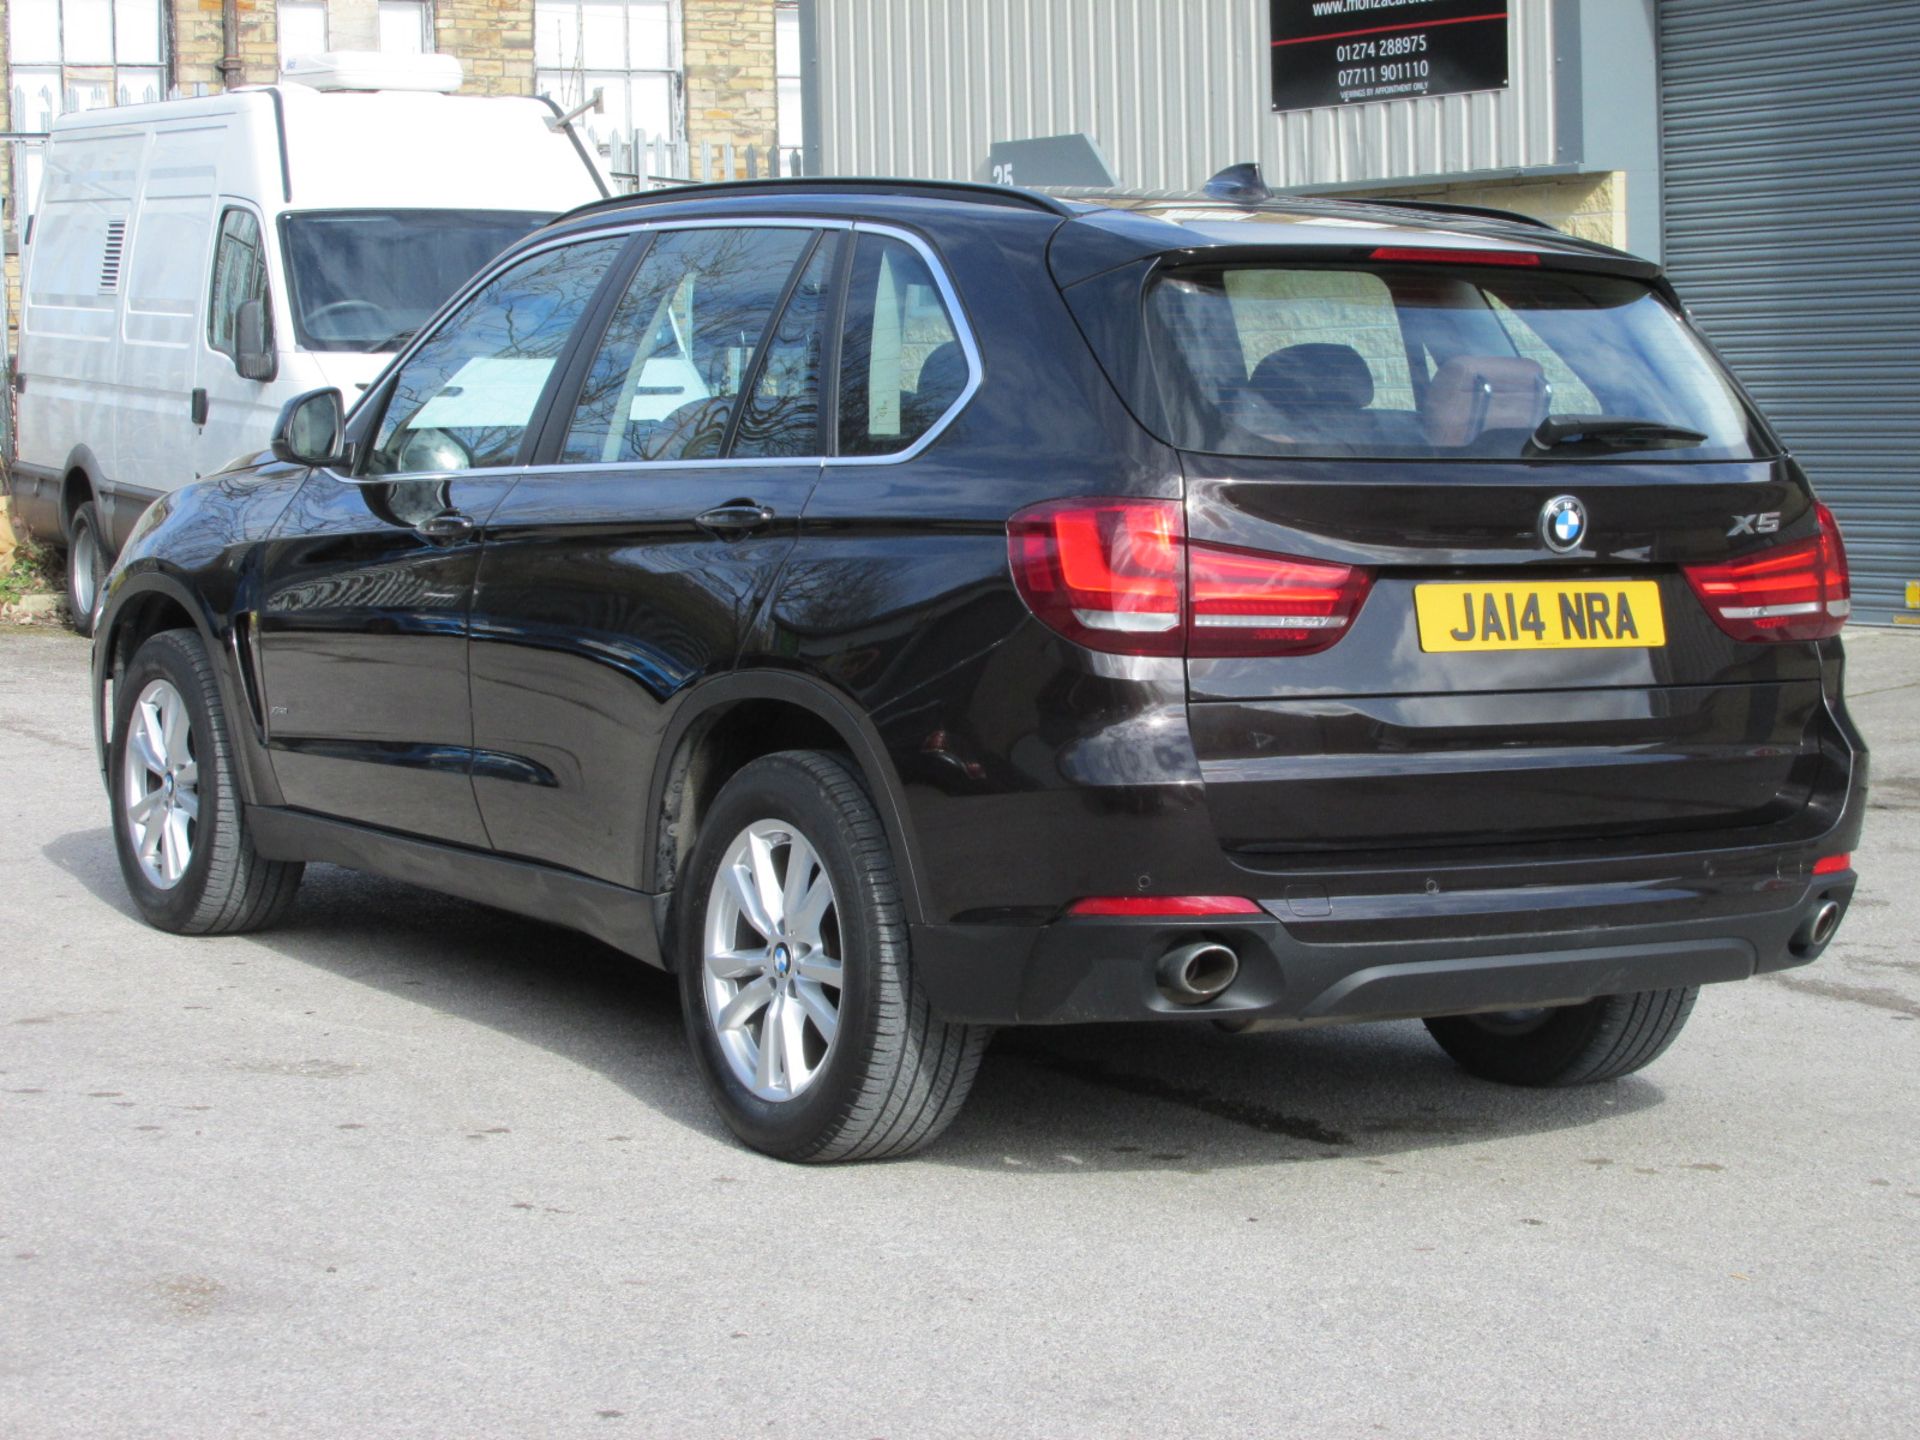 FG64 WOU - BMW X5 3.0DSE Individual 7 Seater - No VAT on hammer, Full BMW Service History. - Image 7 of 20